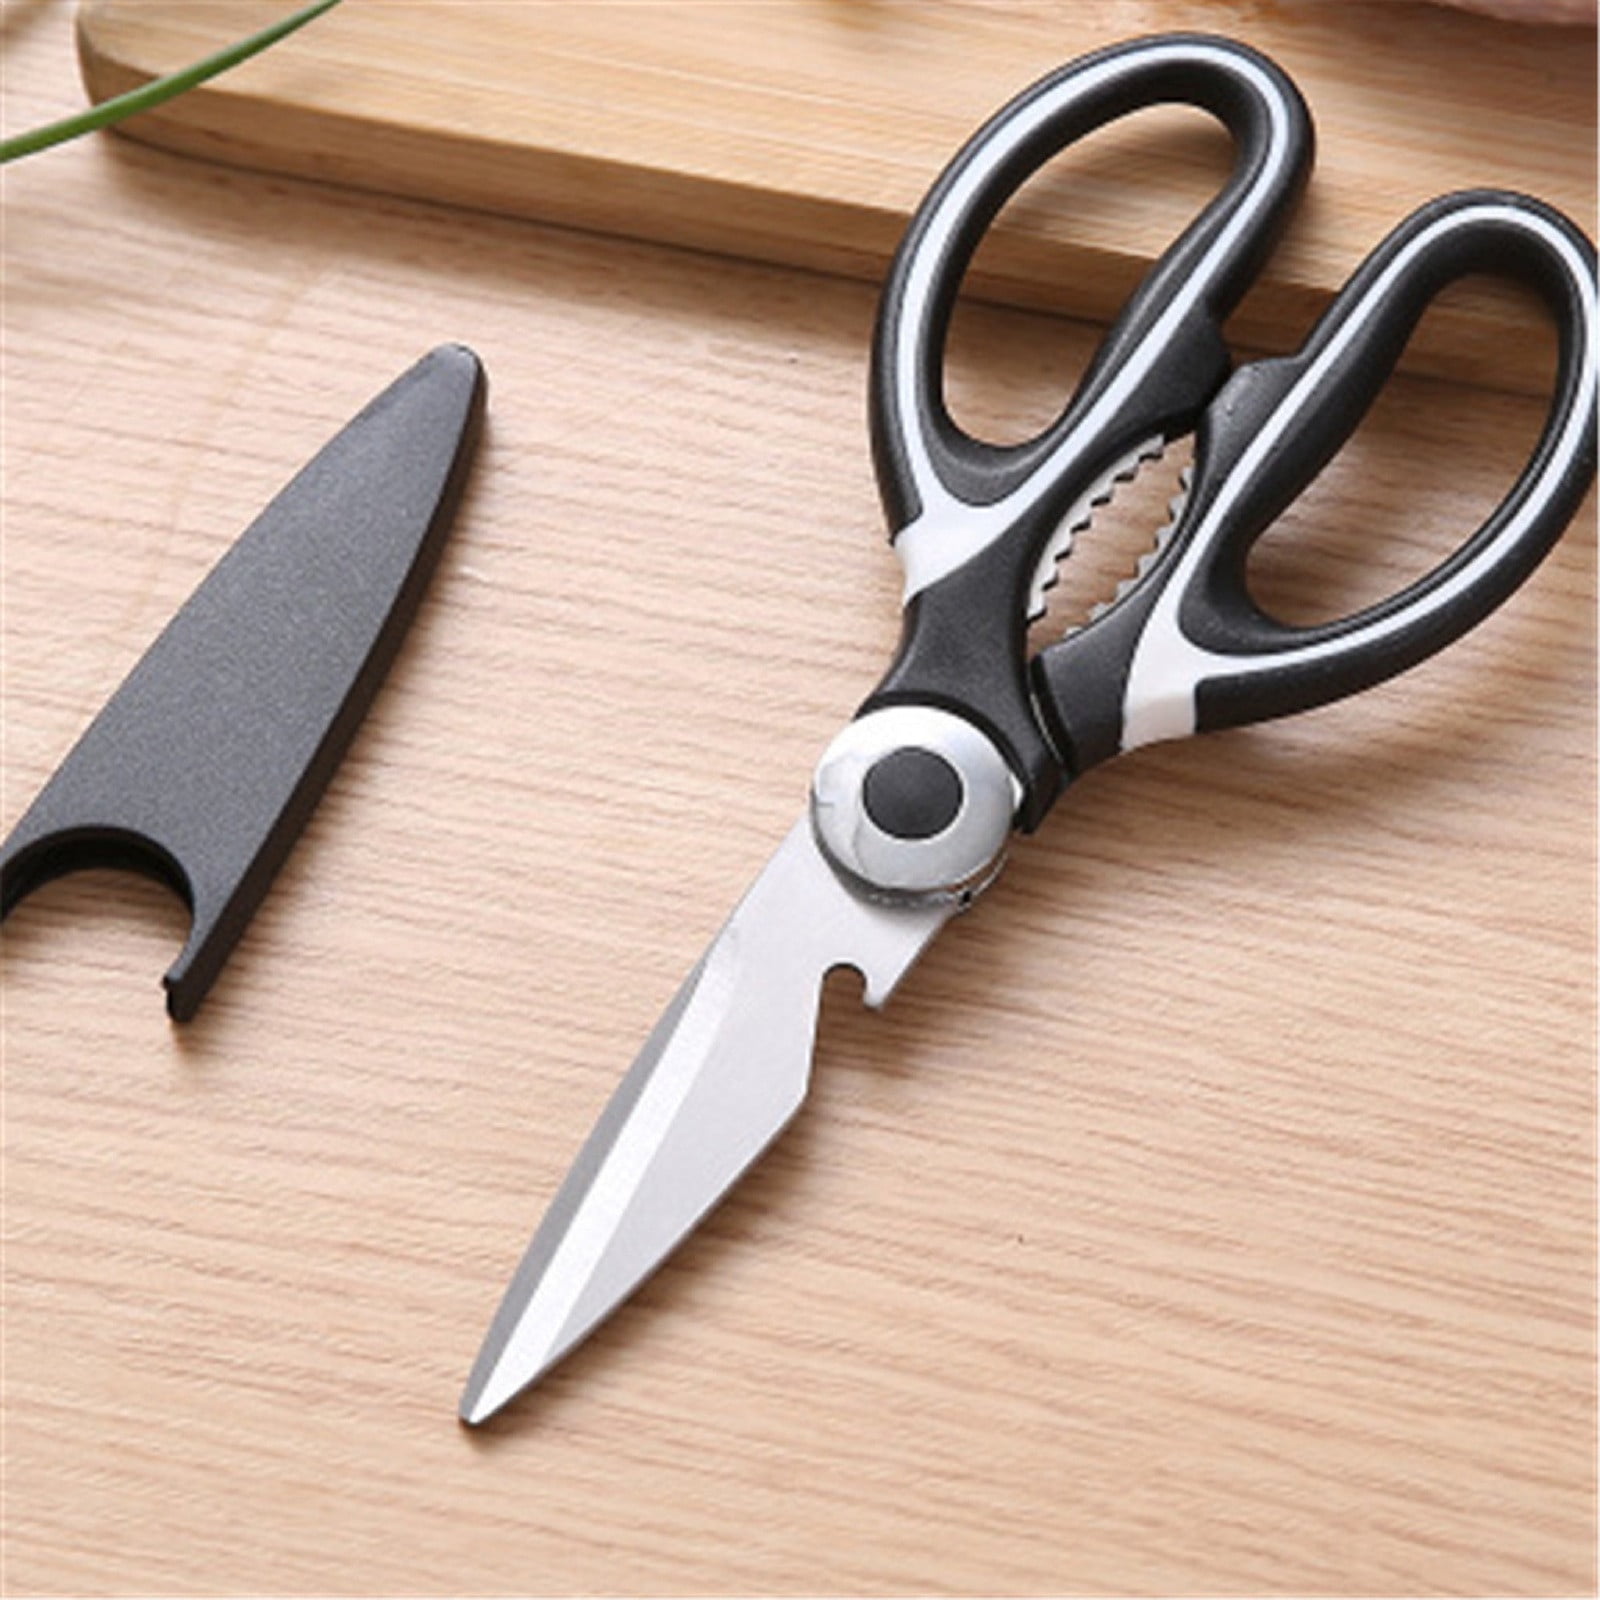 Wave-shaped stainless steel food scissors portable household kitchen  scissors